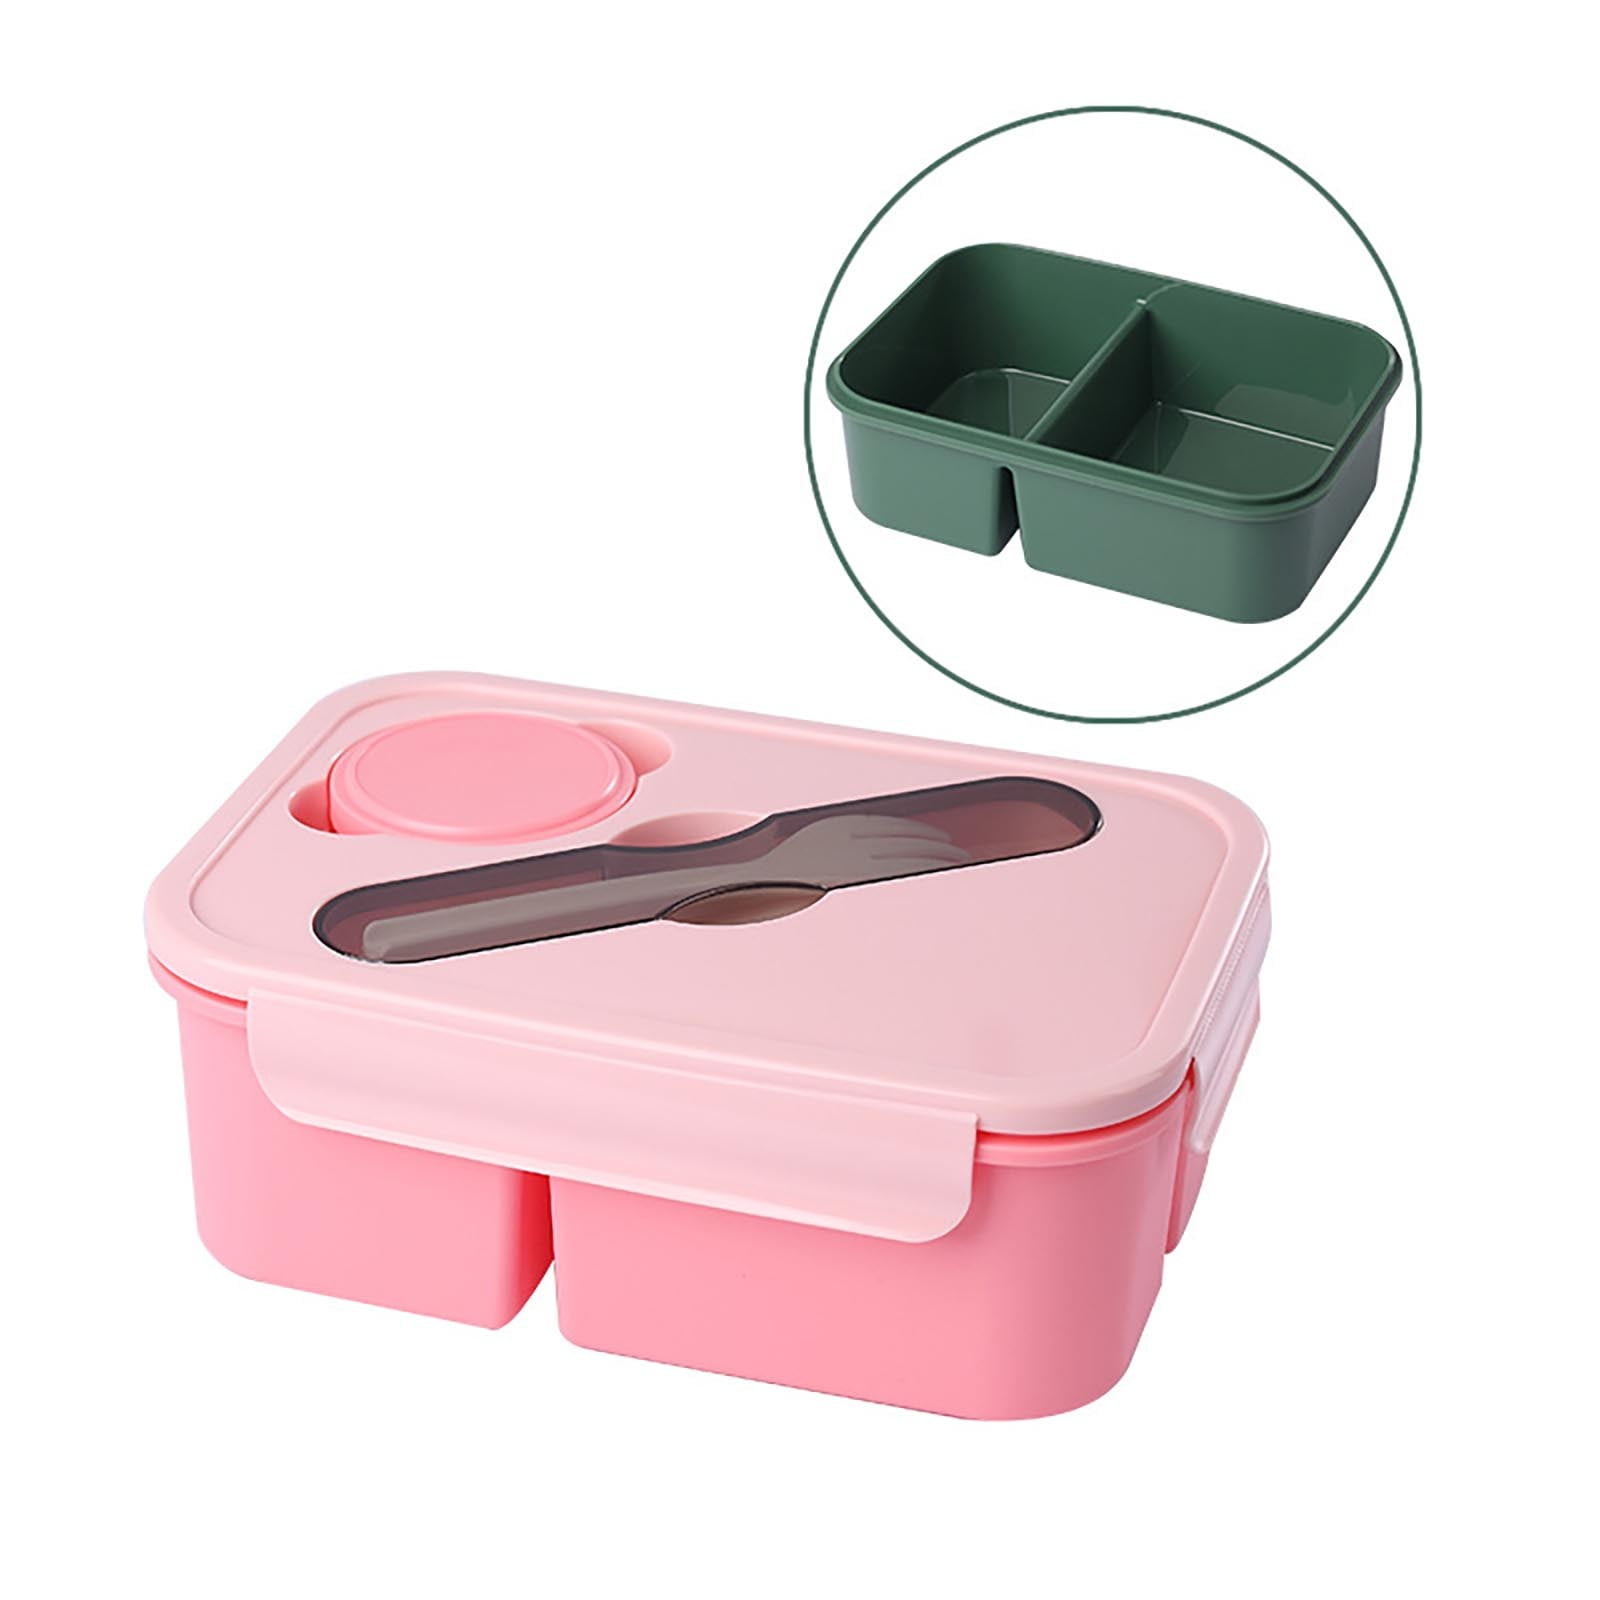 Kyoffiie Vacuum Insulated Food Container for Hot Food Portable Food Warmer  School Lunch Box with Foldable Spoon Silicone Handle for School Office Work  